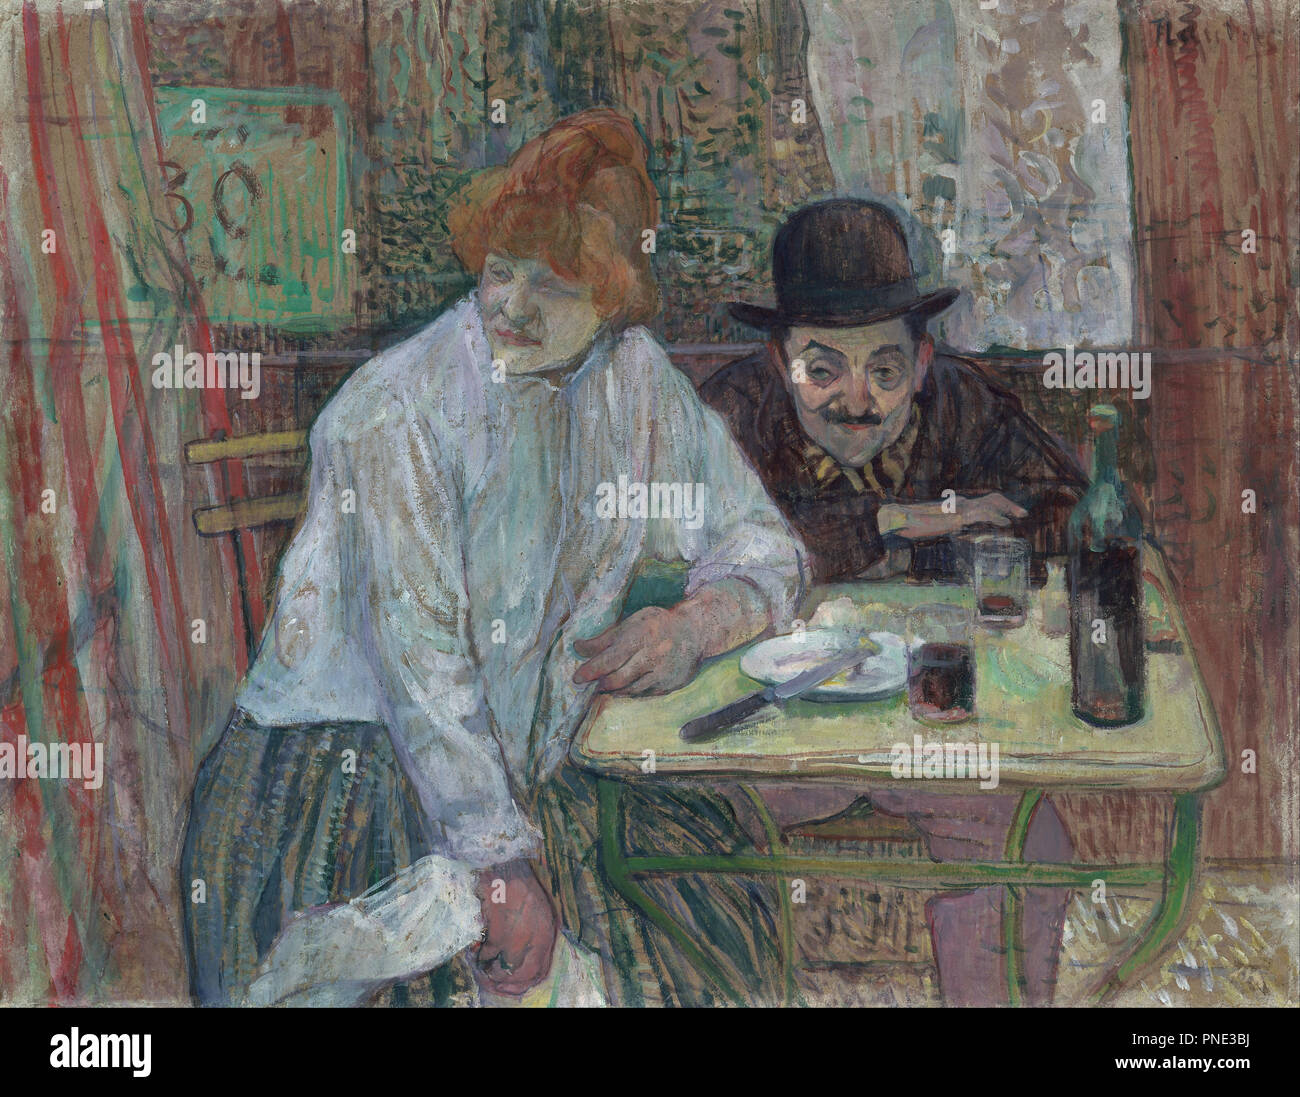 At the Café La Mie. Date/Period: Ca. 1891. Painting. Oil paint on millboard mounted on panel. Height: 530 mm (20.86 in); Width: 679 mm (26.73 in). Author: Henri de Toulouse-Lautrec. Stock Photo